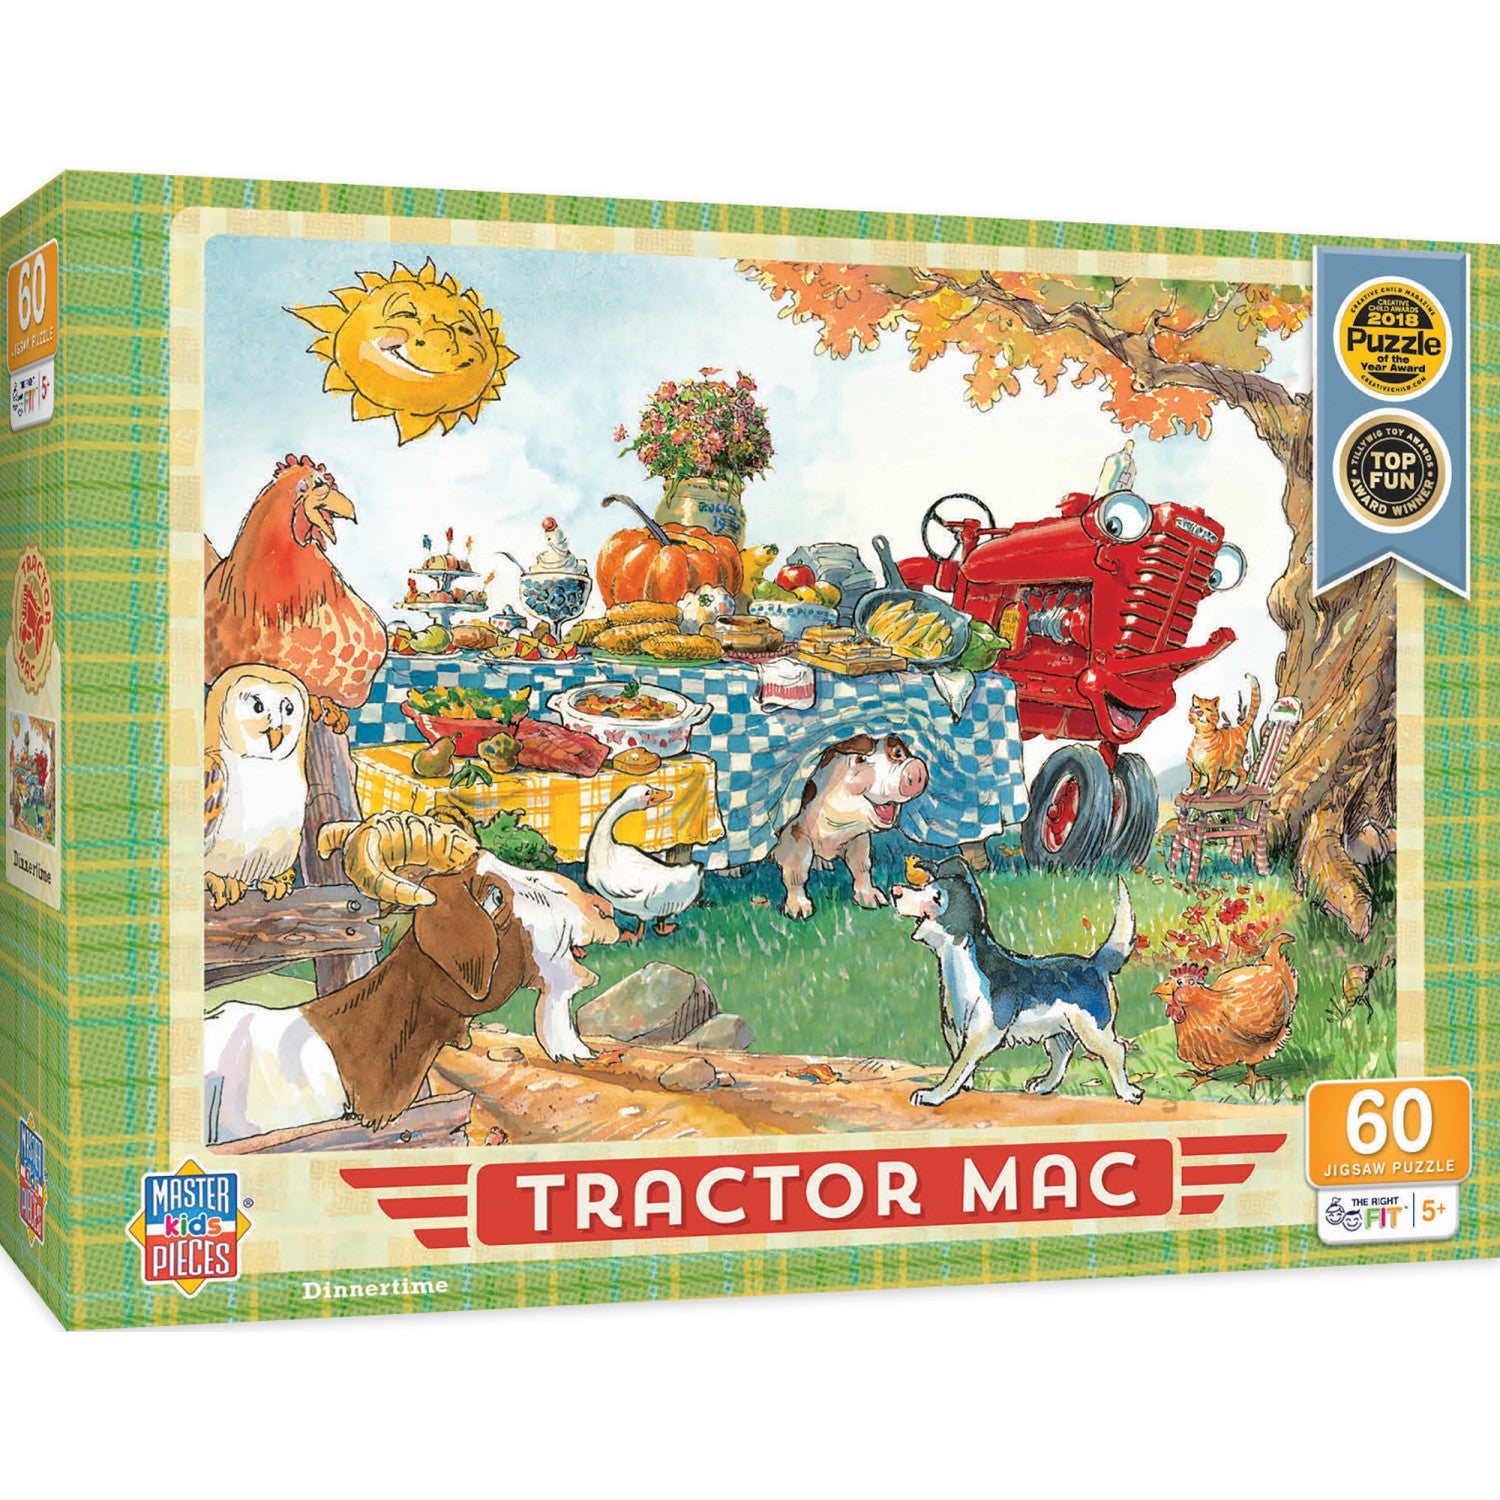 Tractor Mac - Dinner Time 60 Piece Jigsaw Puzzle